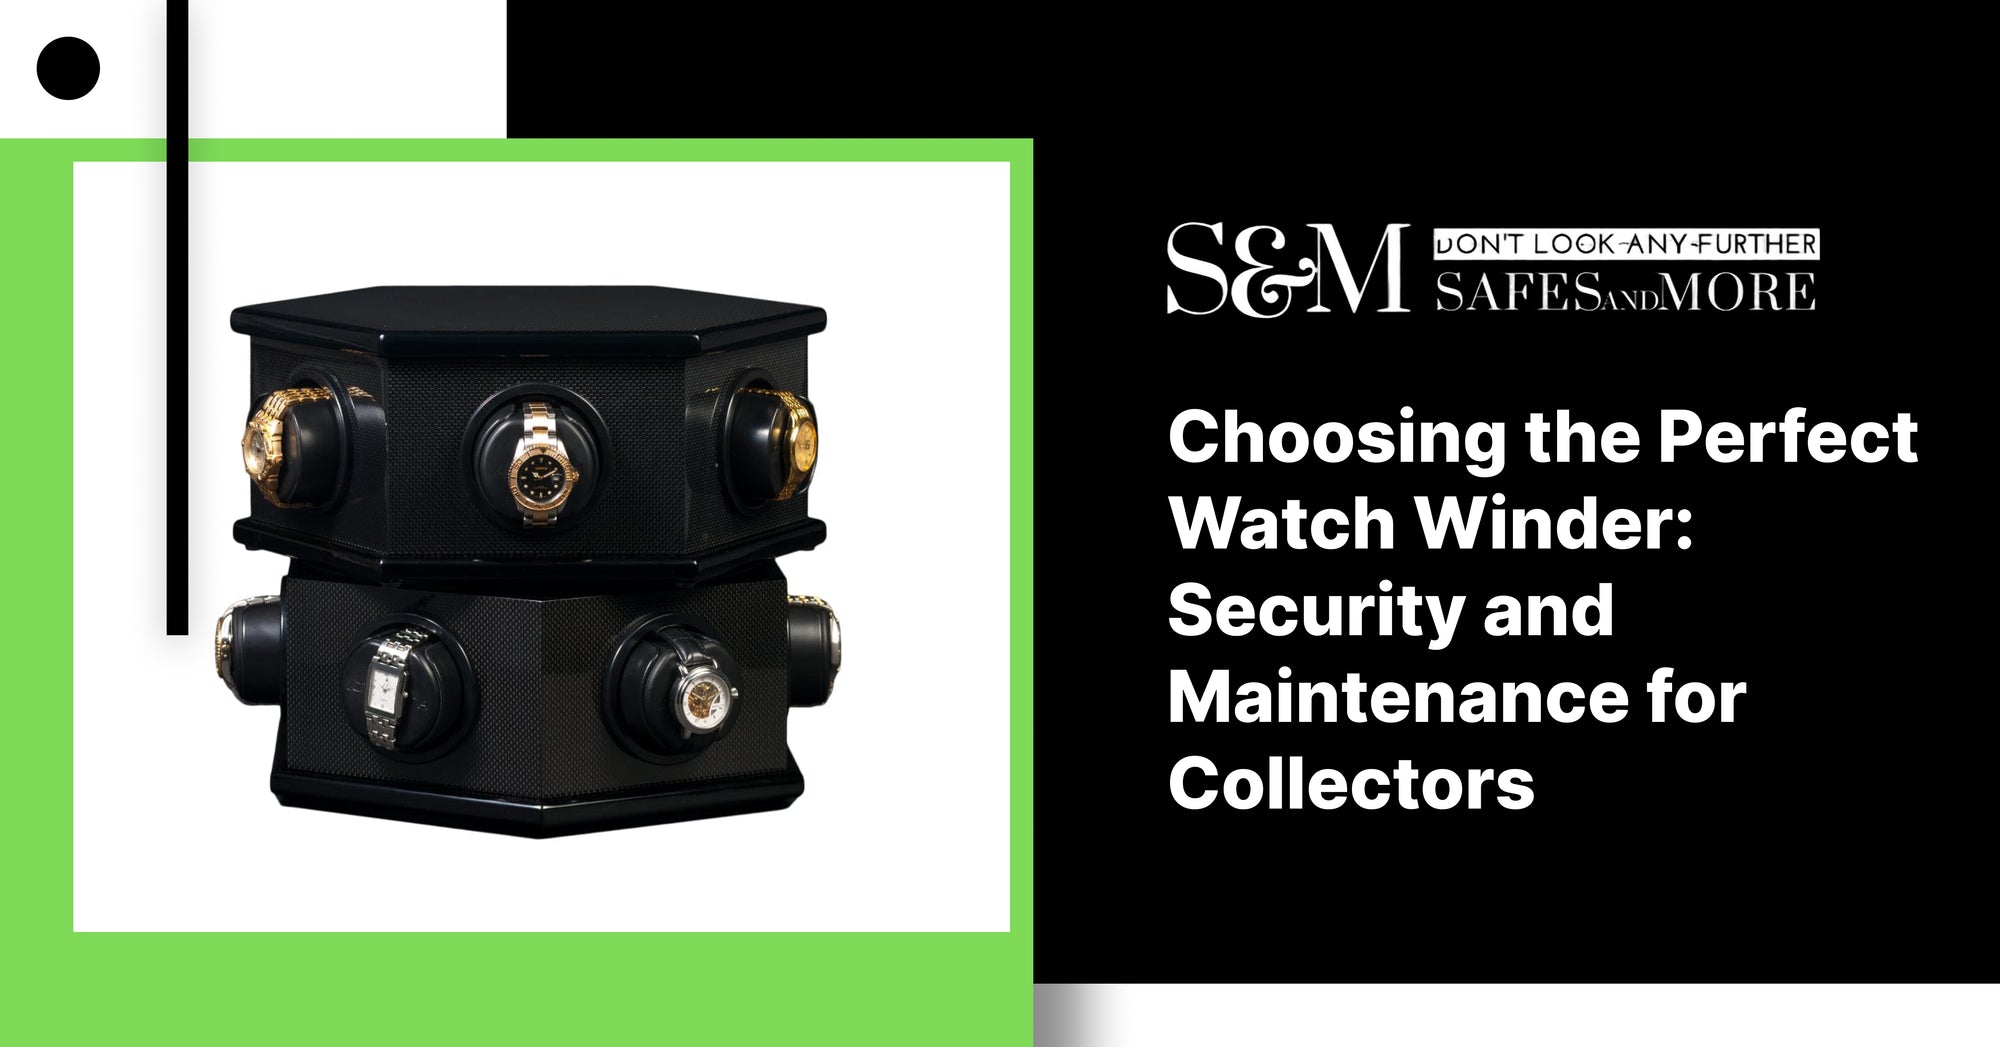 Choosing the Perfect Watch Winder: Security and Maintenance for Collectors